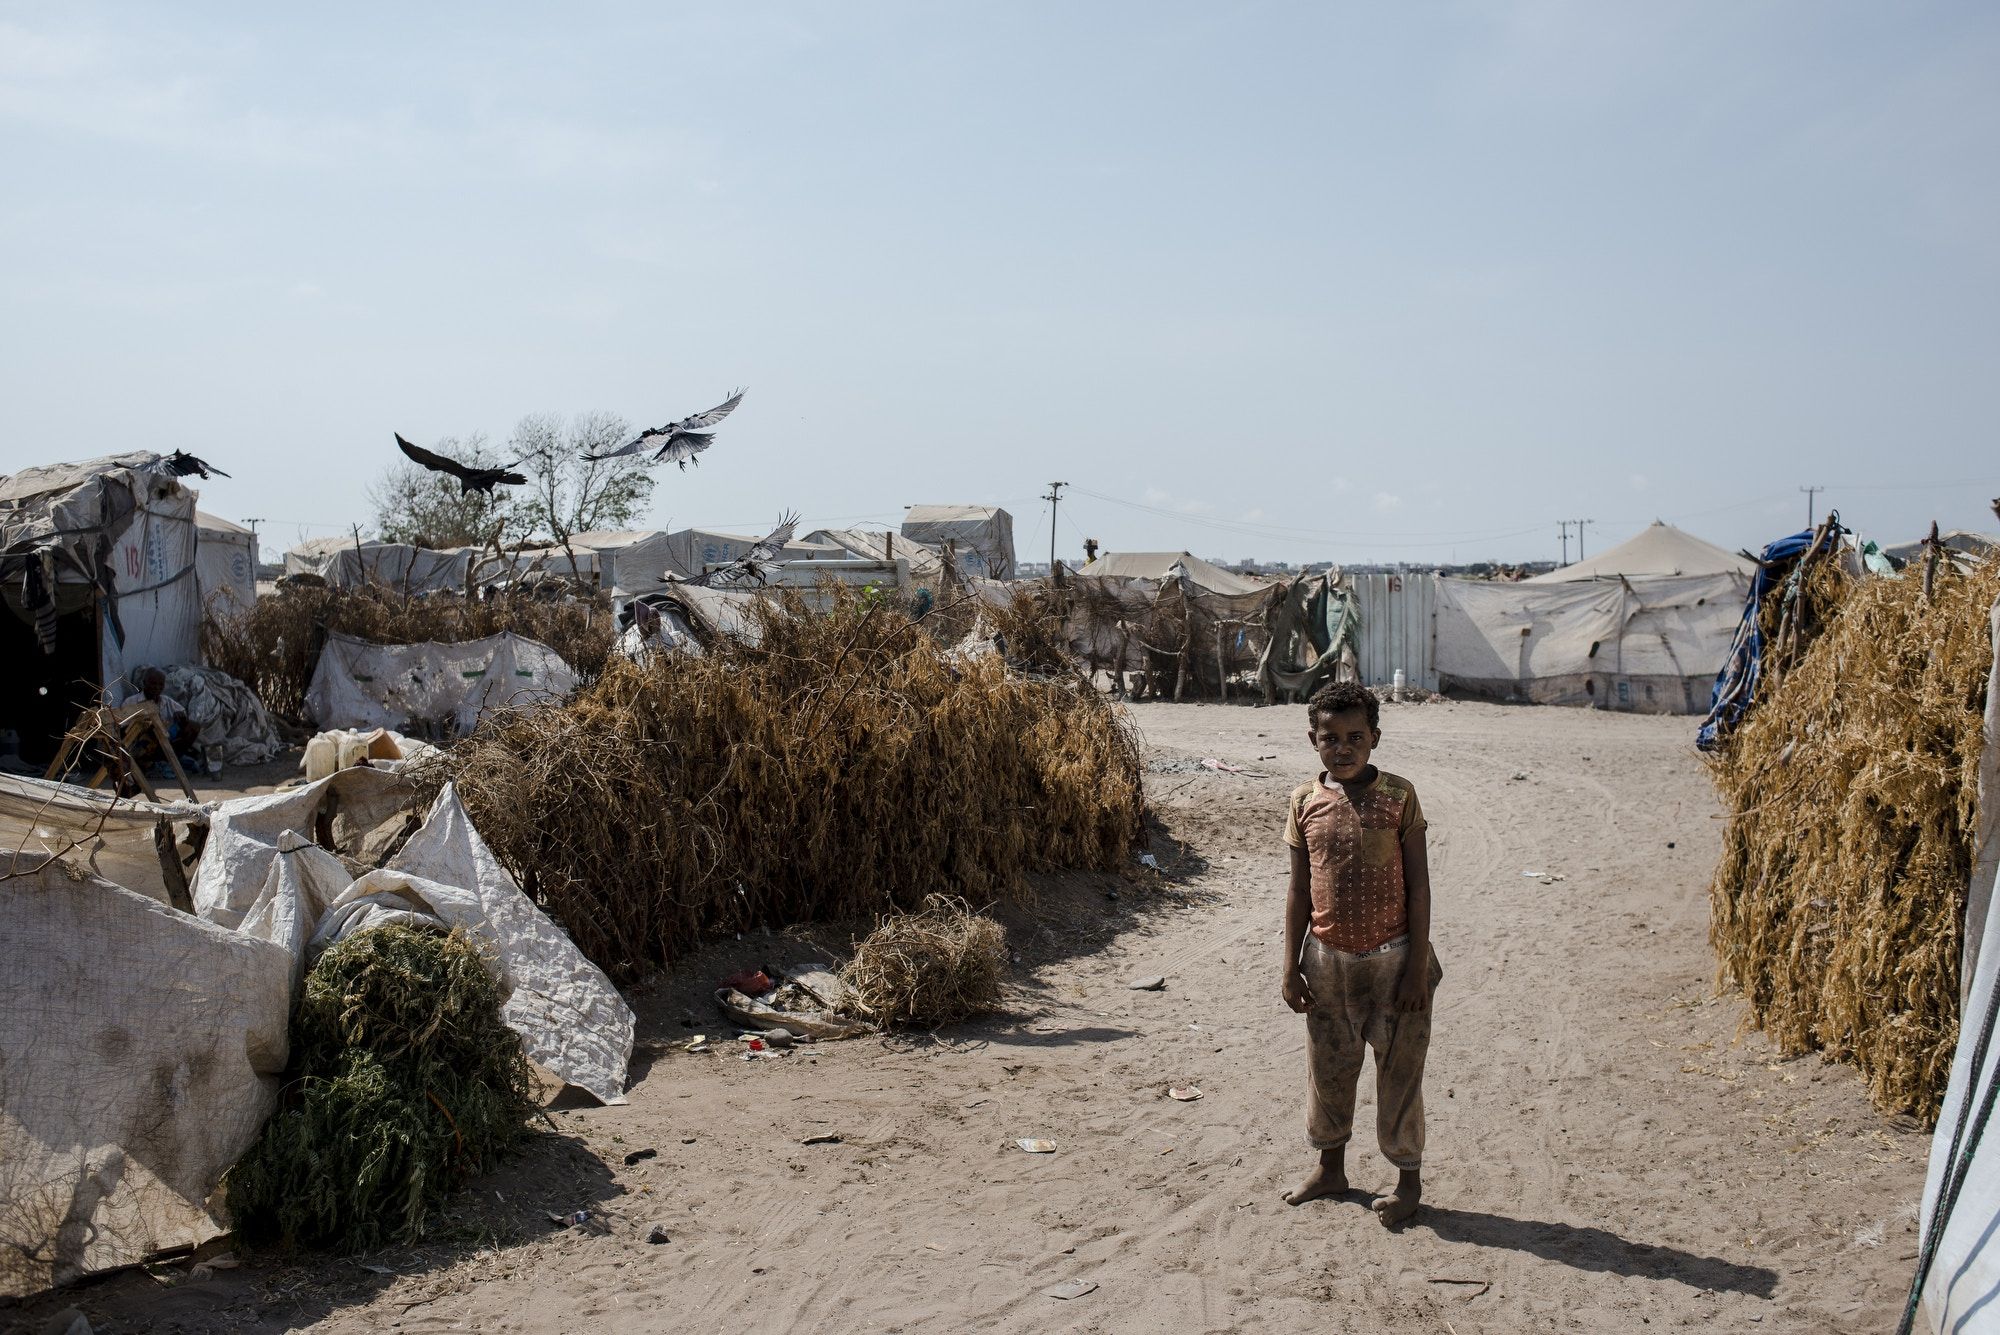 A Yemeni boy walks through the sand back to his tent in Mishqafa Camp on April 23, 2018. Most of the families in the camp come from impoverished areas near the front line, but the camp is also destitute. Image by Alex Potter. Yemen, 2018. 